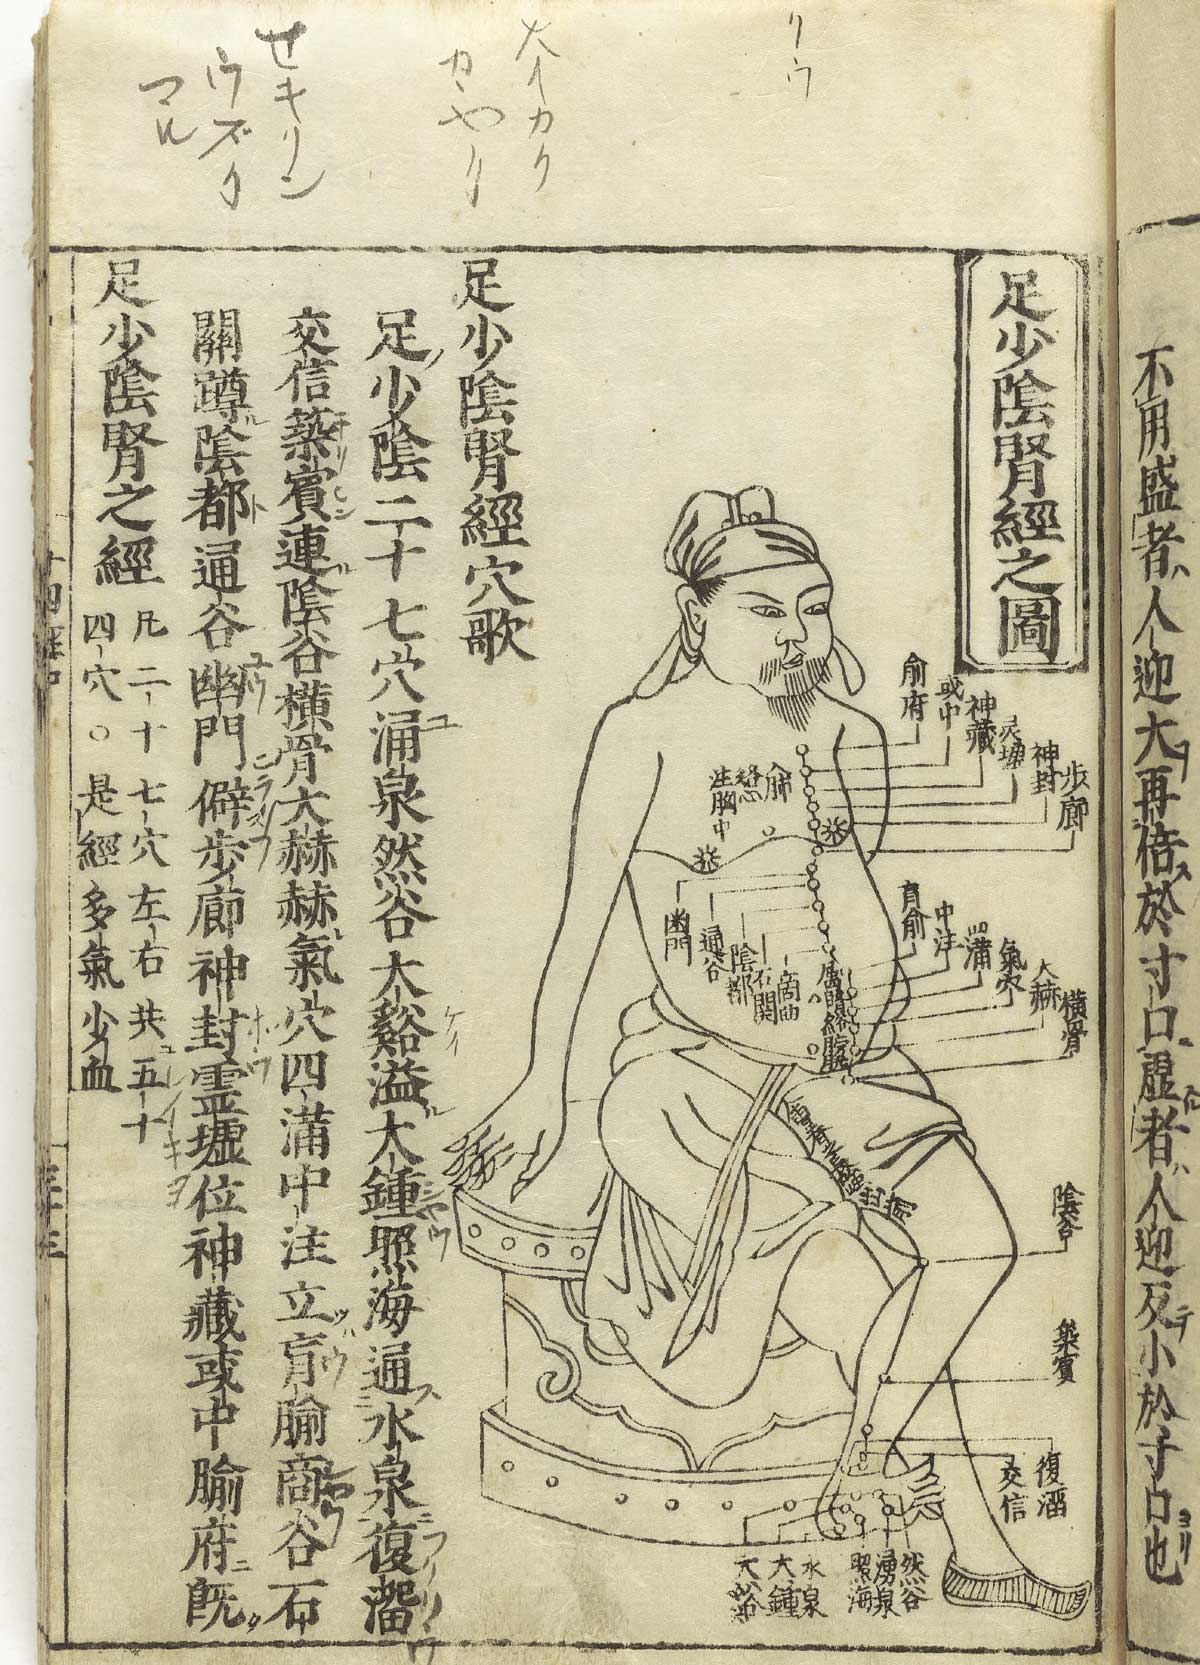 Woodcut showing the Shaoyin kidney meridian of foot of a seated male figure in profile wearing a loin cloth with meridians indicated down the chest and leg with Chinese characters giving names of the points, from Hua Shou’s Jushikei hakki, NLM Call no.: WZ 260 H868s 1716.